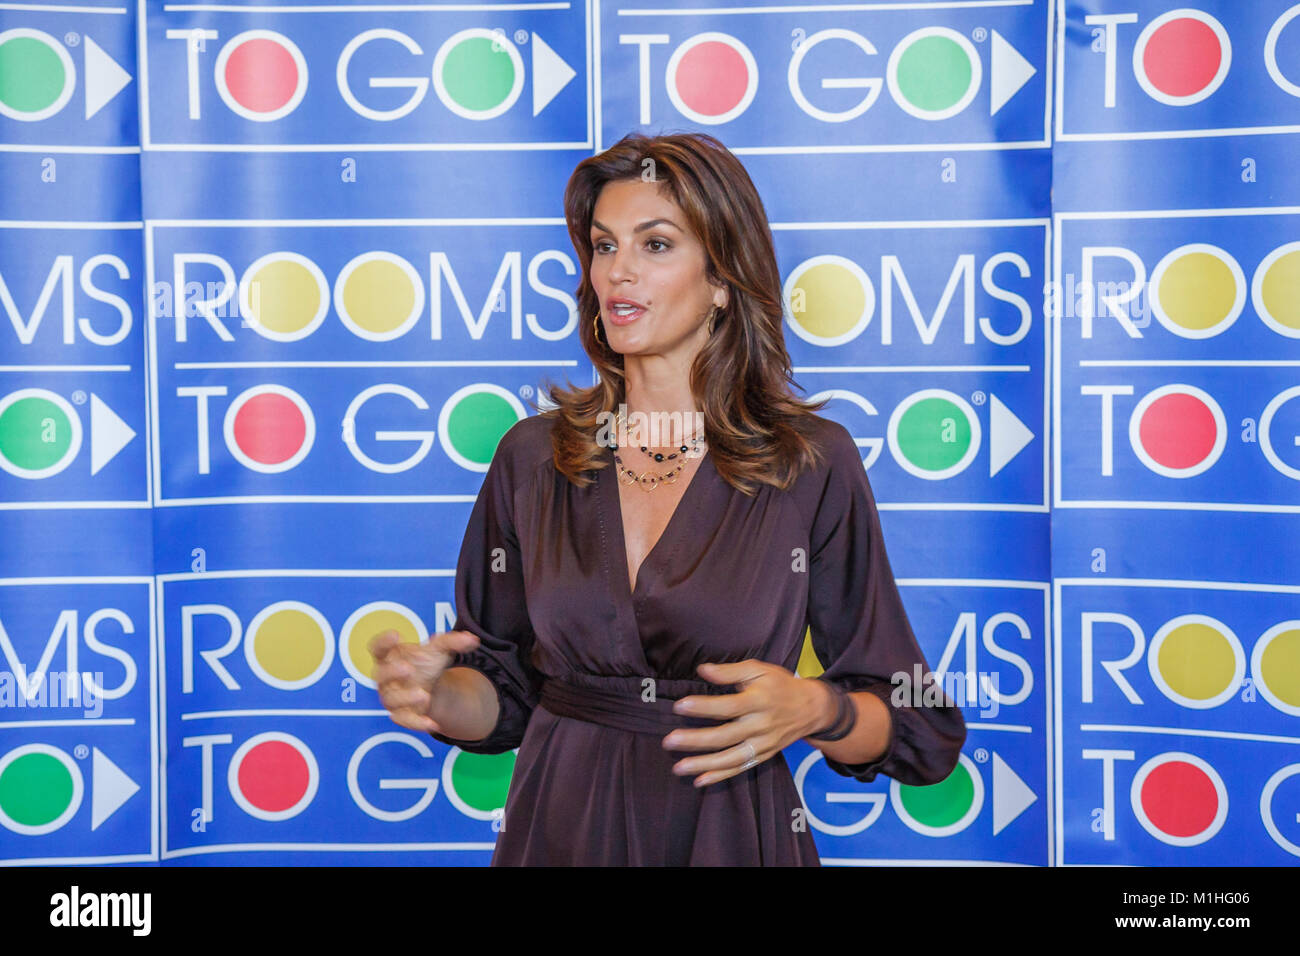 Miami Florida,Rooms To Go,furniture business,home furnishings,Cindy Crawford,celebrity personal appearance,product,products,special,competing,competit Stock Photo